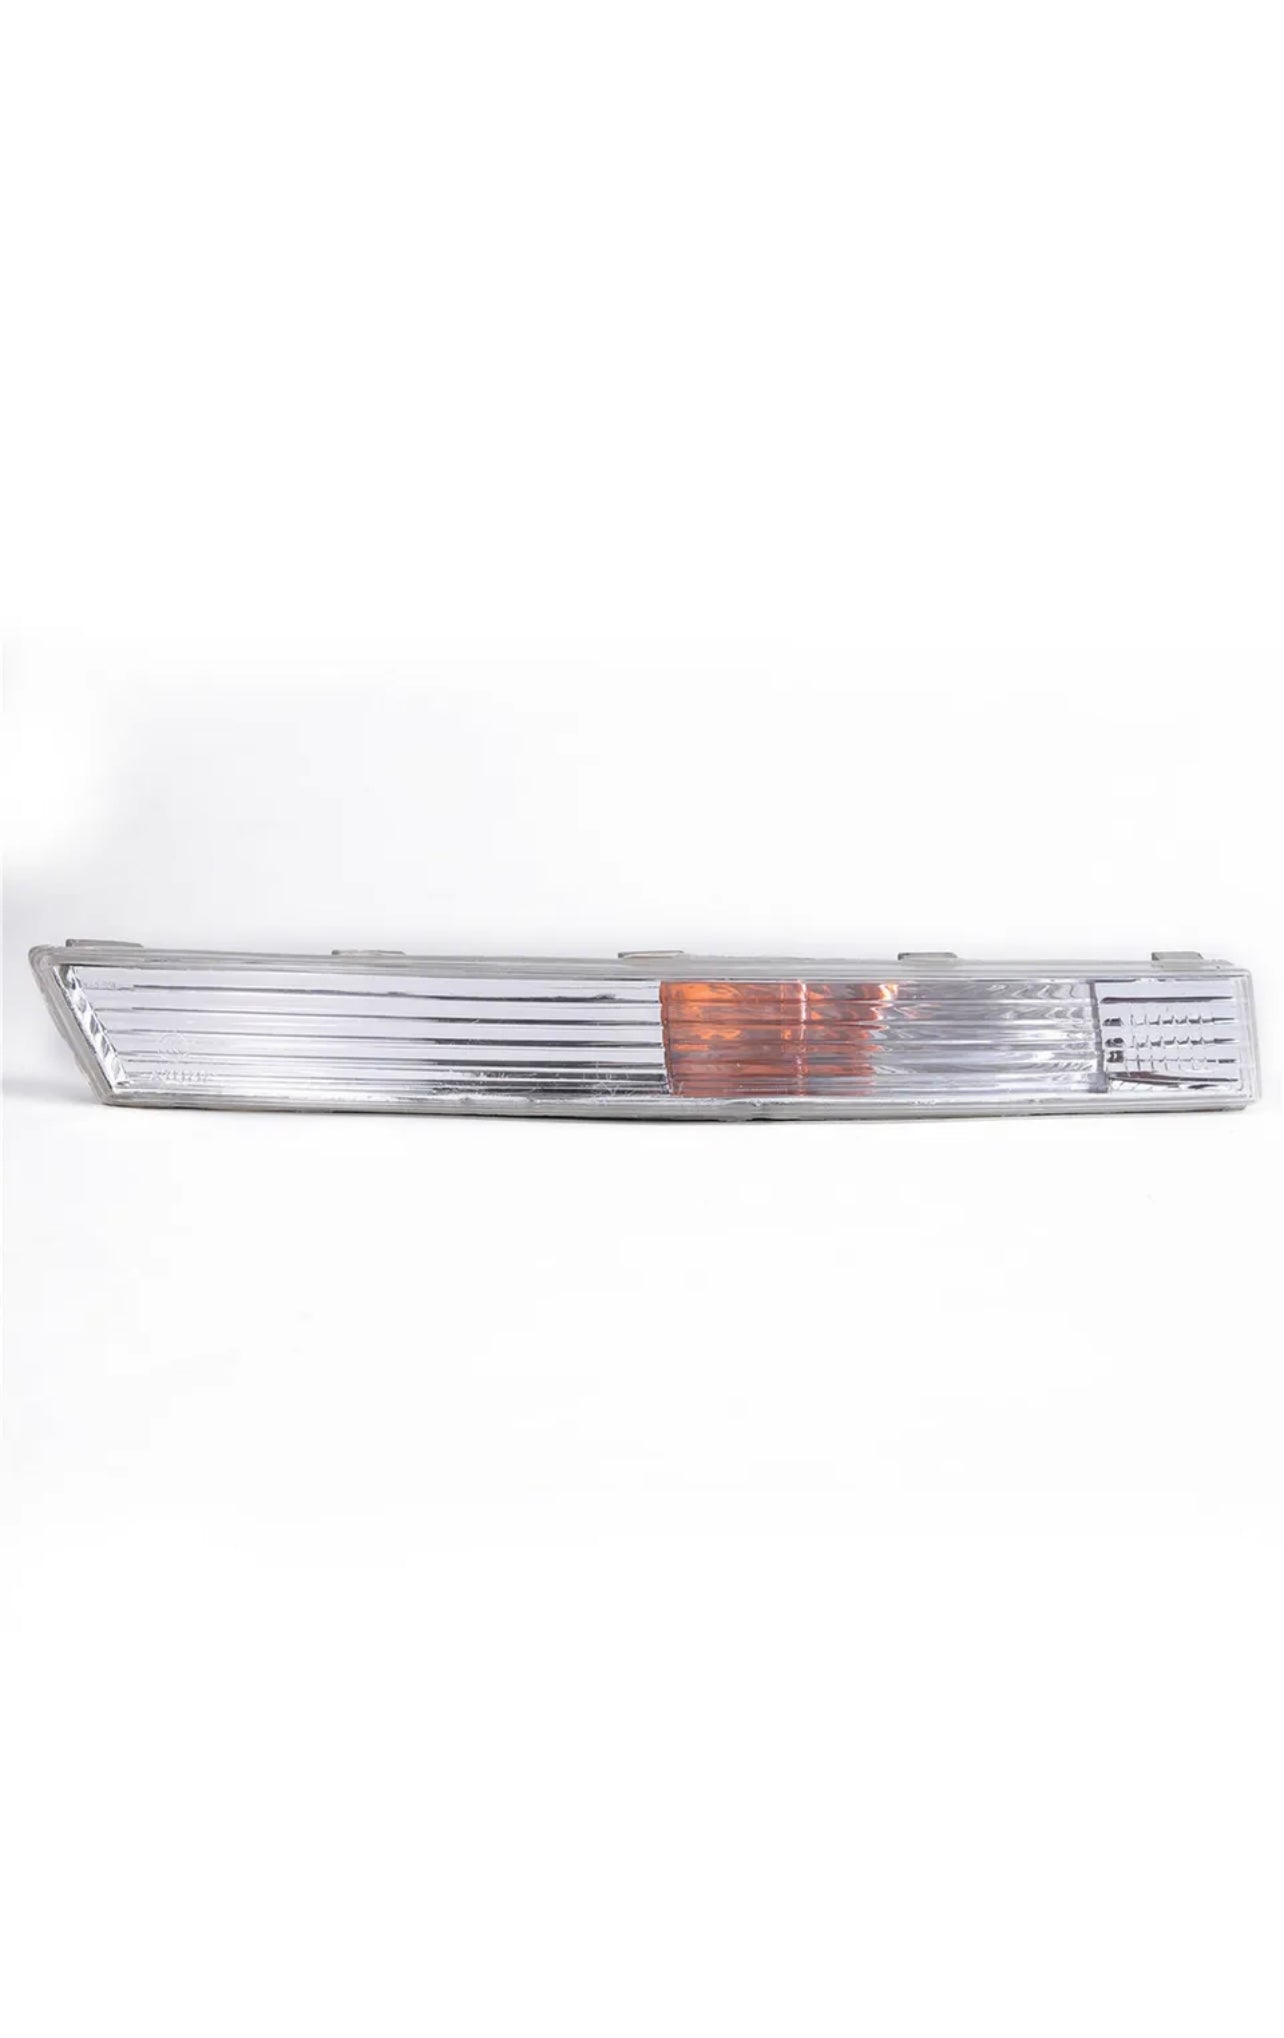 Corner Turning Signal Light Lamp Front Right For VW Passat 2005+ 3CD 953 042 A Right Front Bumper Indicator Housing